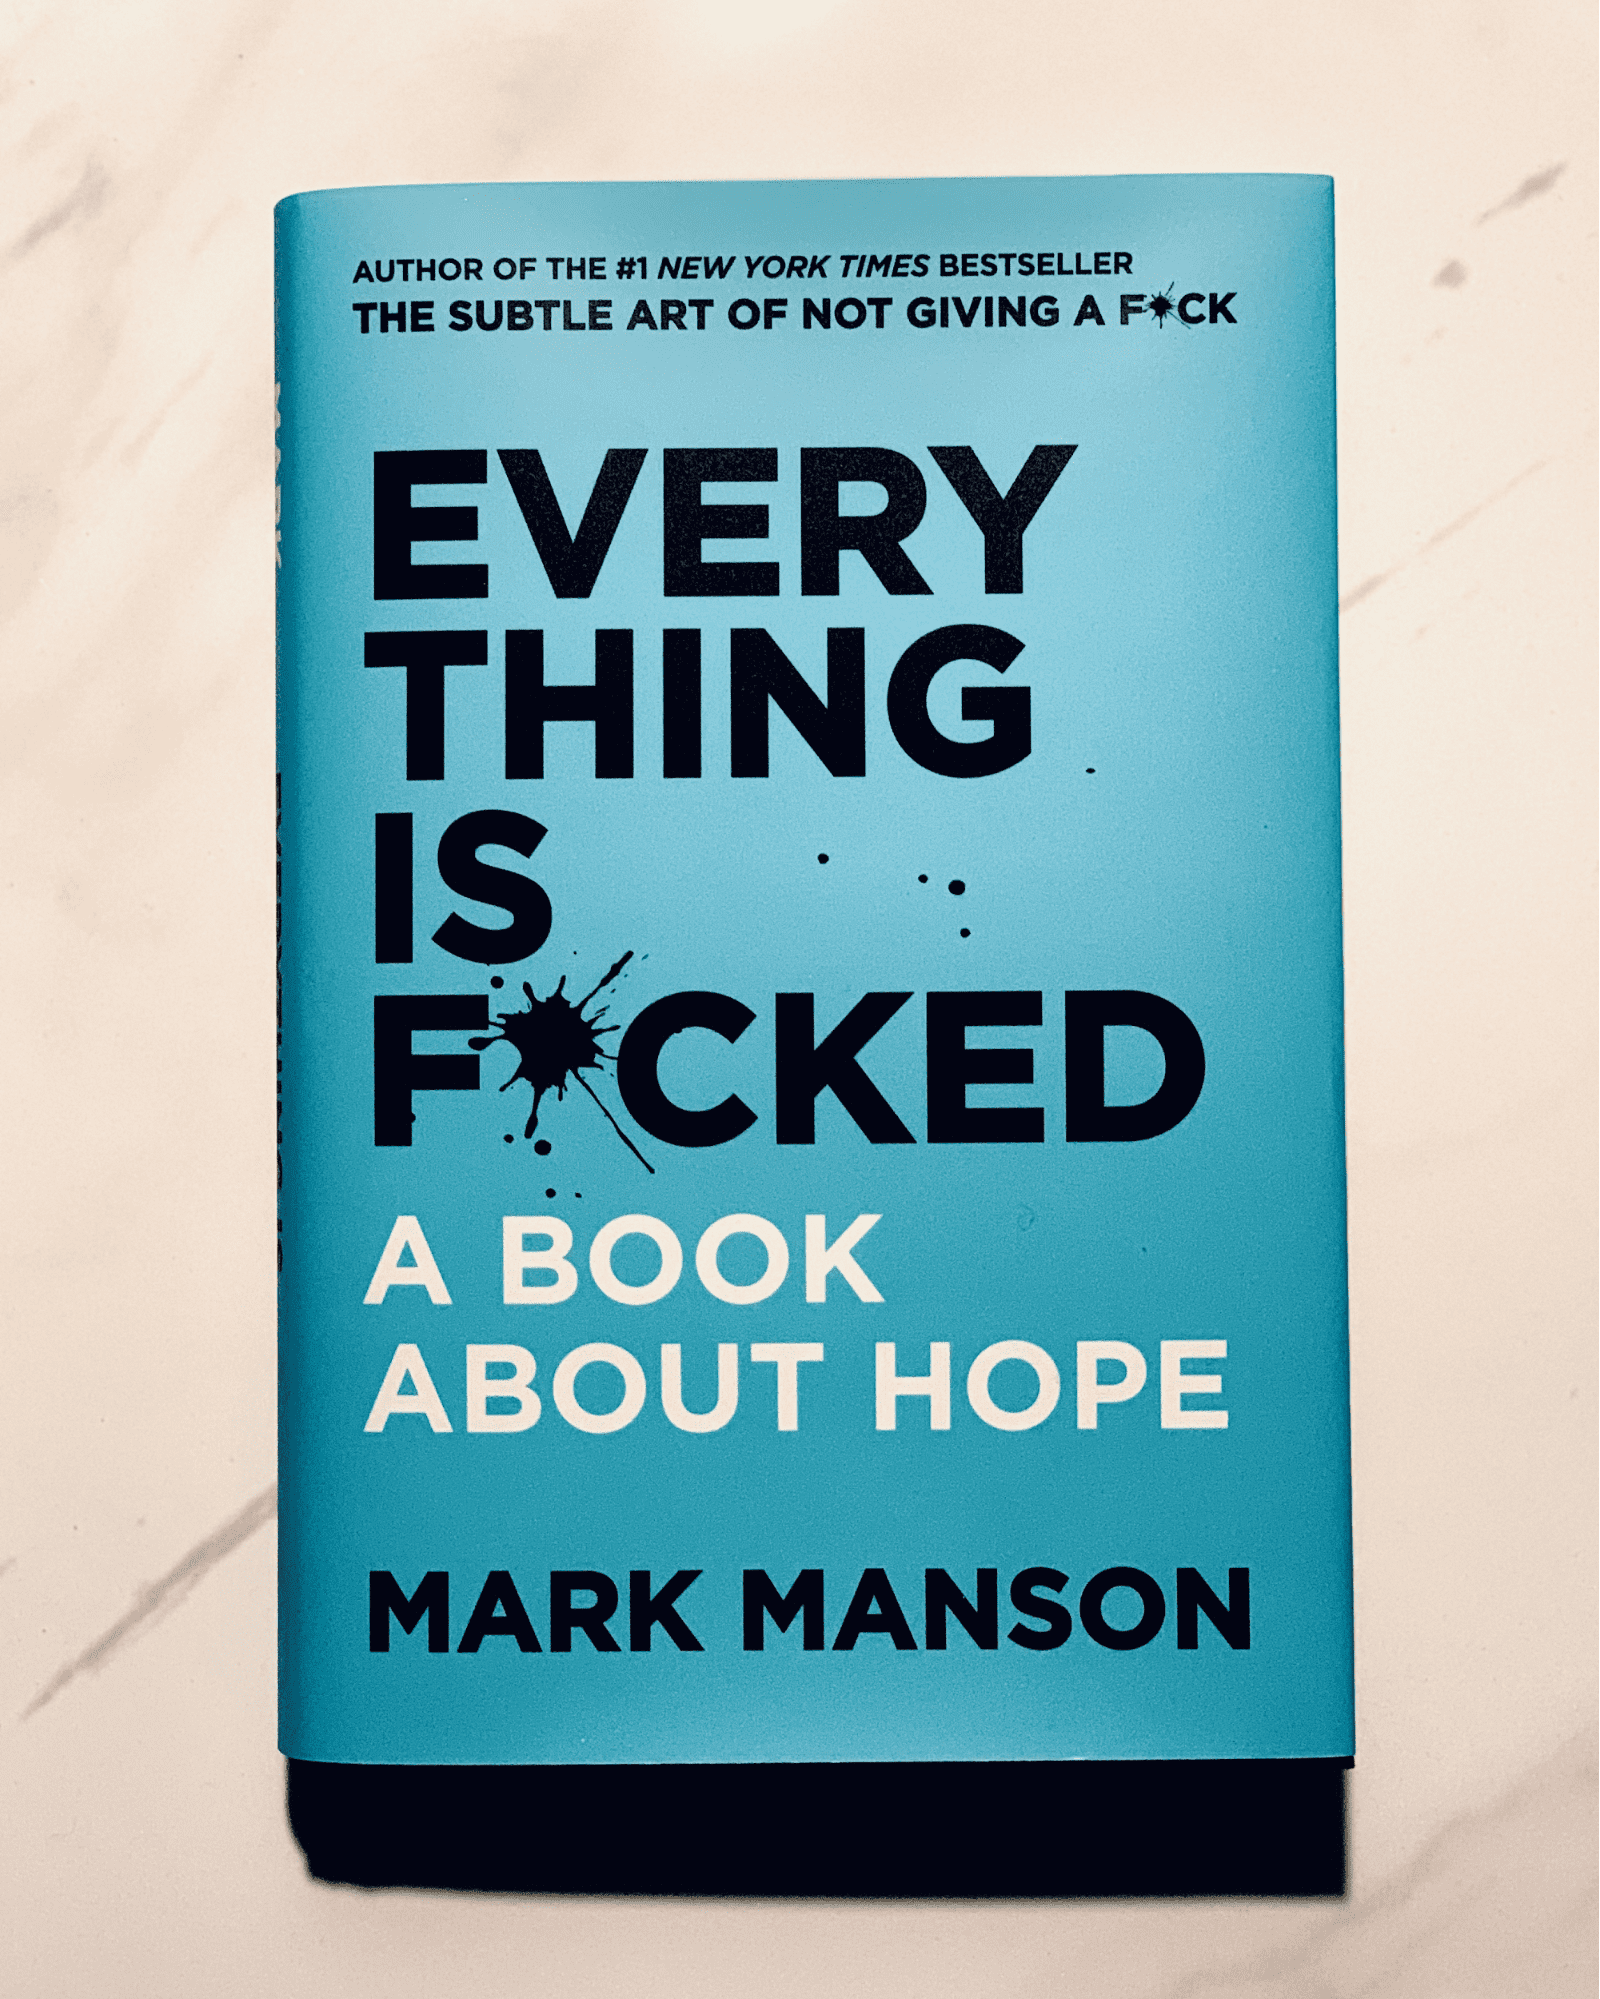 Mark Manson Interview — Why is the World Going Crazy?